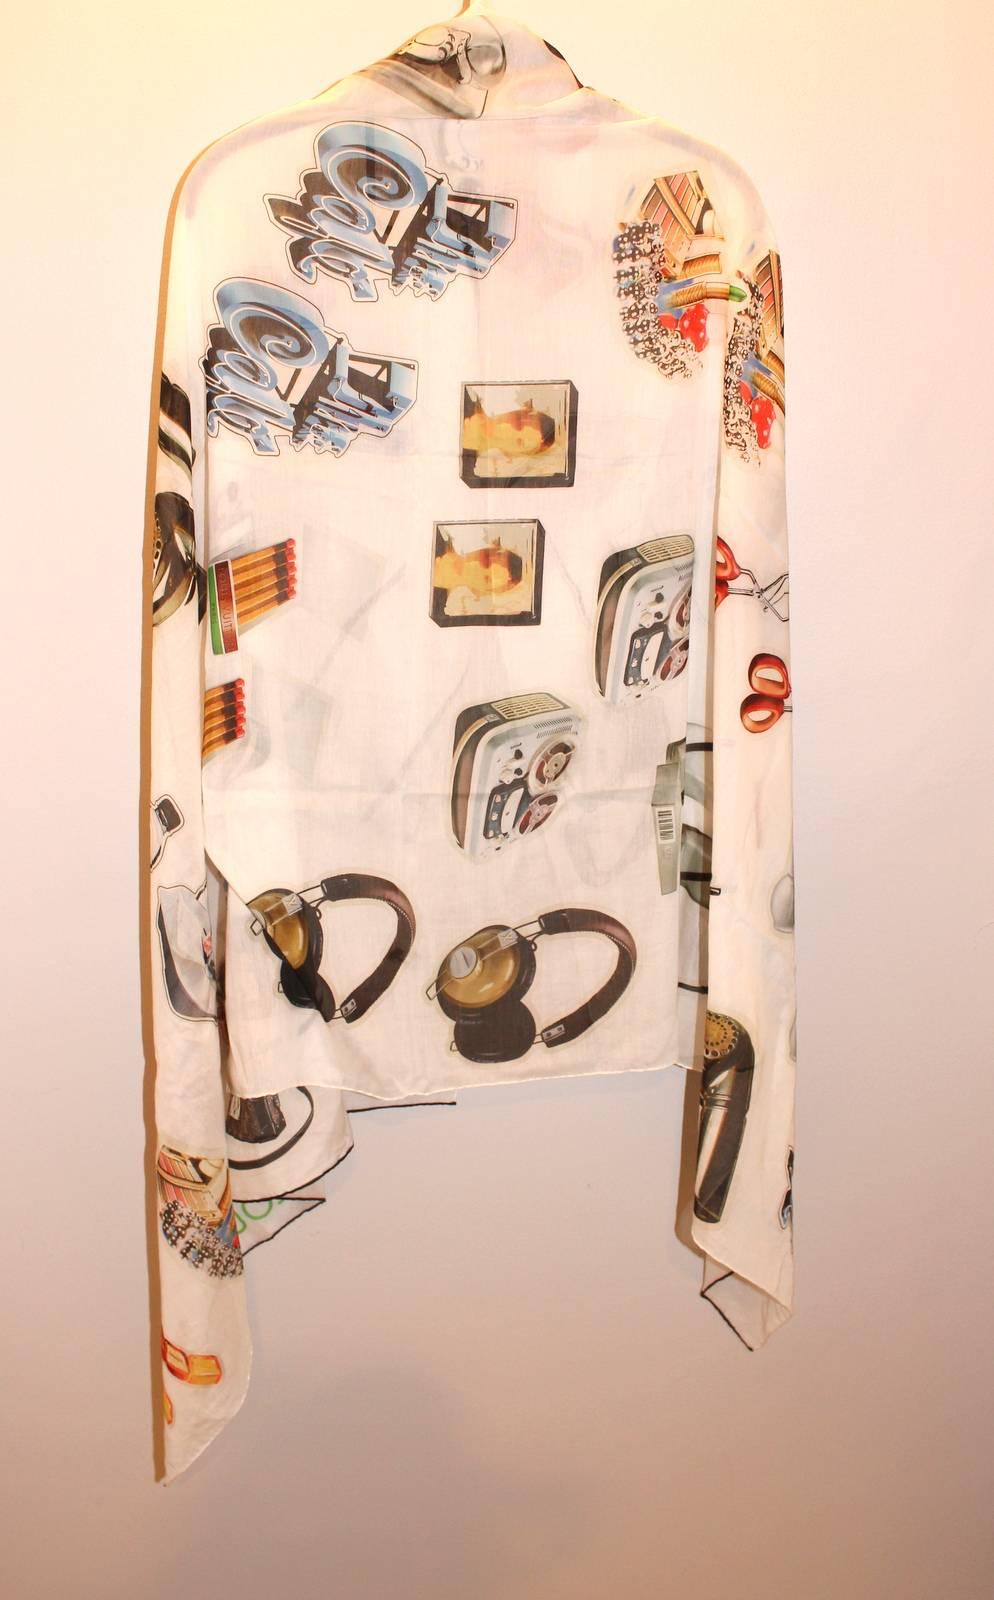 Louis Vuitton White Animation Stickers Stole- Pristine Retail $685.00

The whimsical scarf is from the Spring Summer 2015 collection.  It is a beautiful addition to any wardrobe.  
Silk and cotton white long stole is covered in multicolored